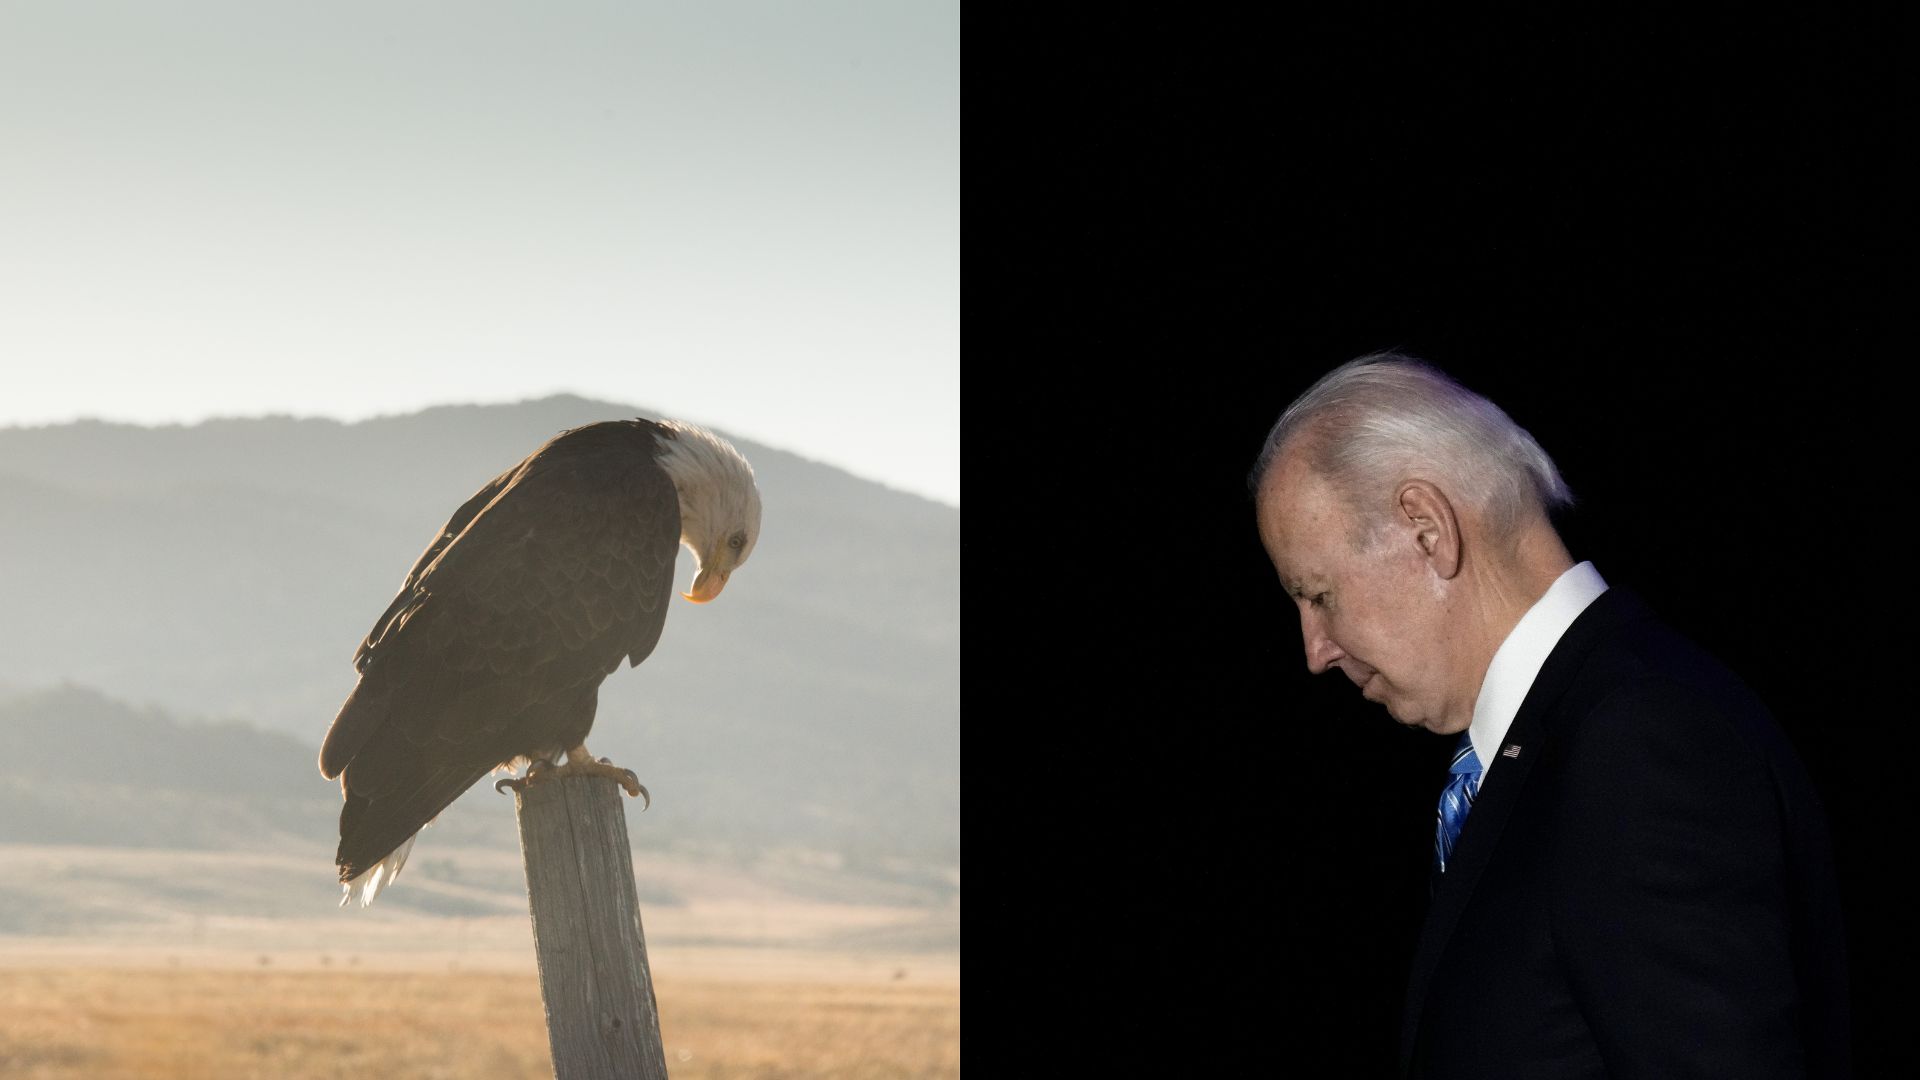 Perfect Metaphor: Illegal Aliens Kill Bald Eagle For A Free Meal In Biden’s America, Police Say